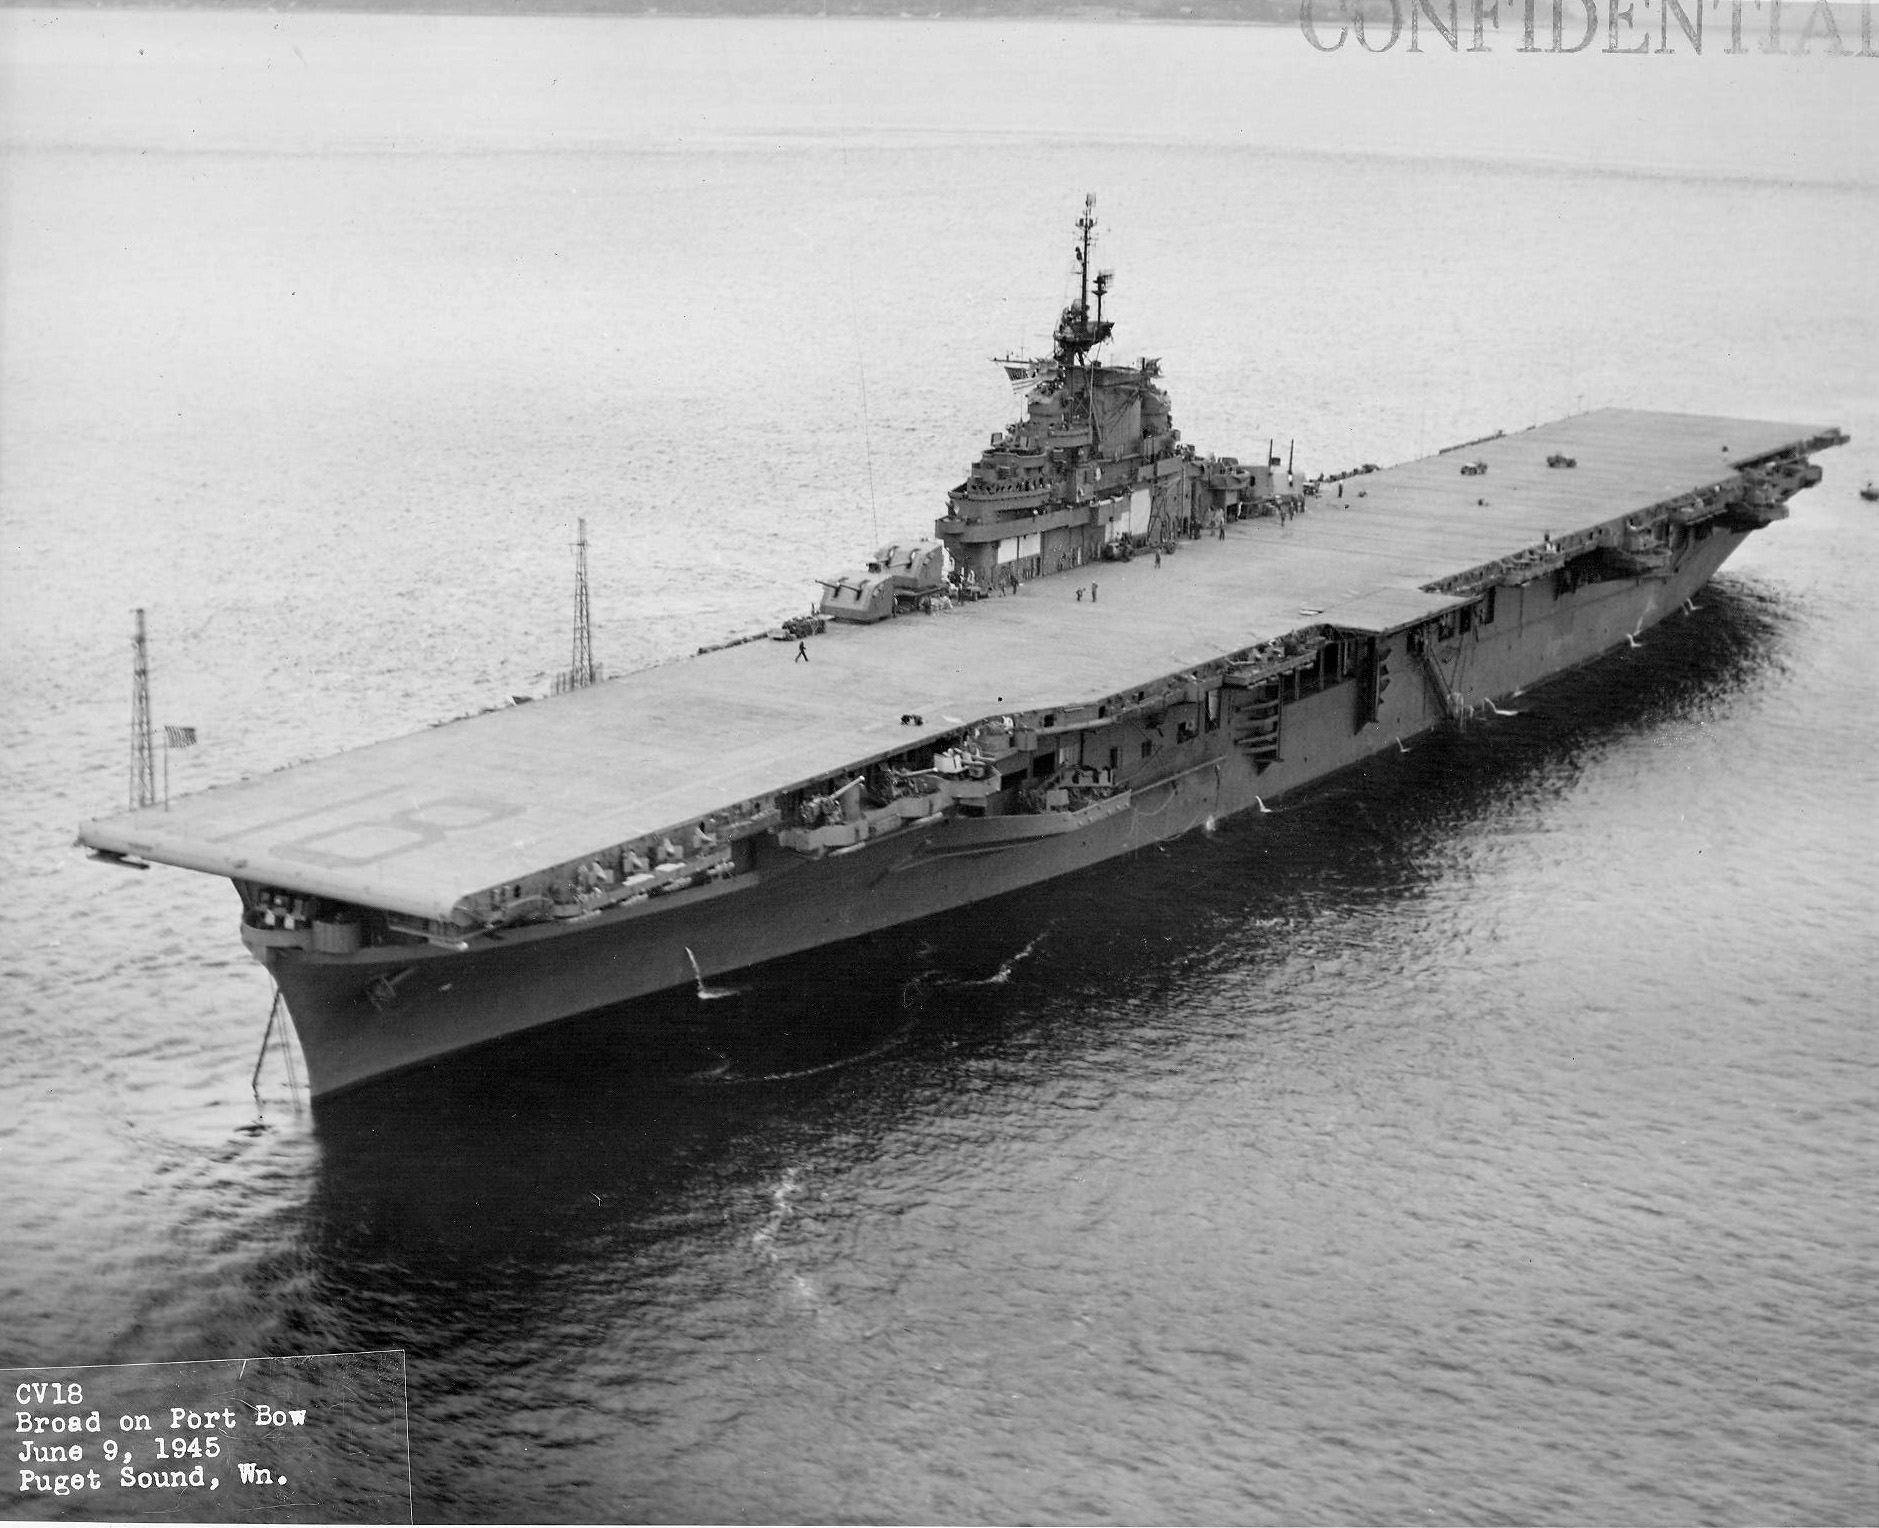 USS Wasp (Essex-class) just before departing Puget Sound Navy Yard, Bremerton, Washington, United States bound for San Francisco, California, 9 Jun 1945. Note new Measure 21 paint scheme, all over sea blue. Photo 4 of 5